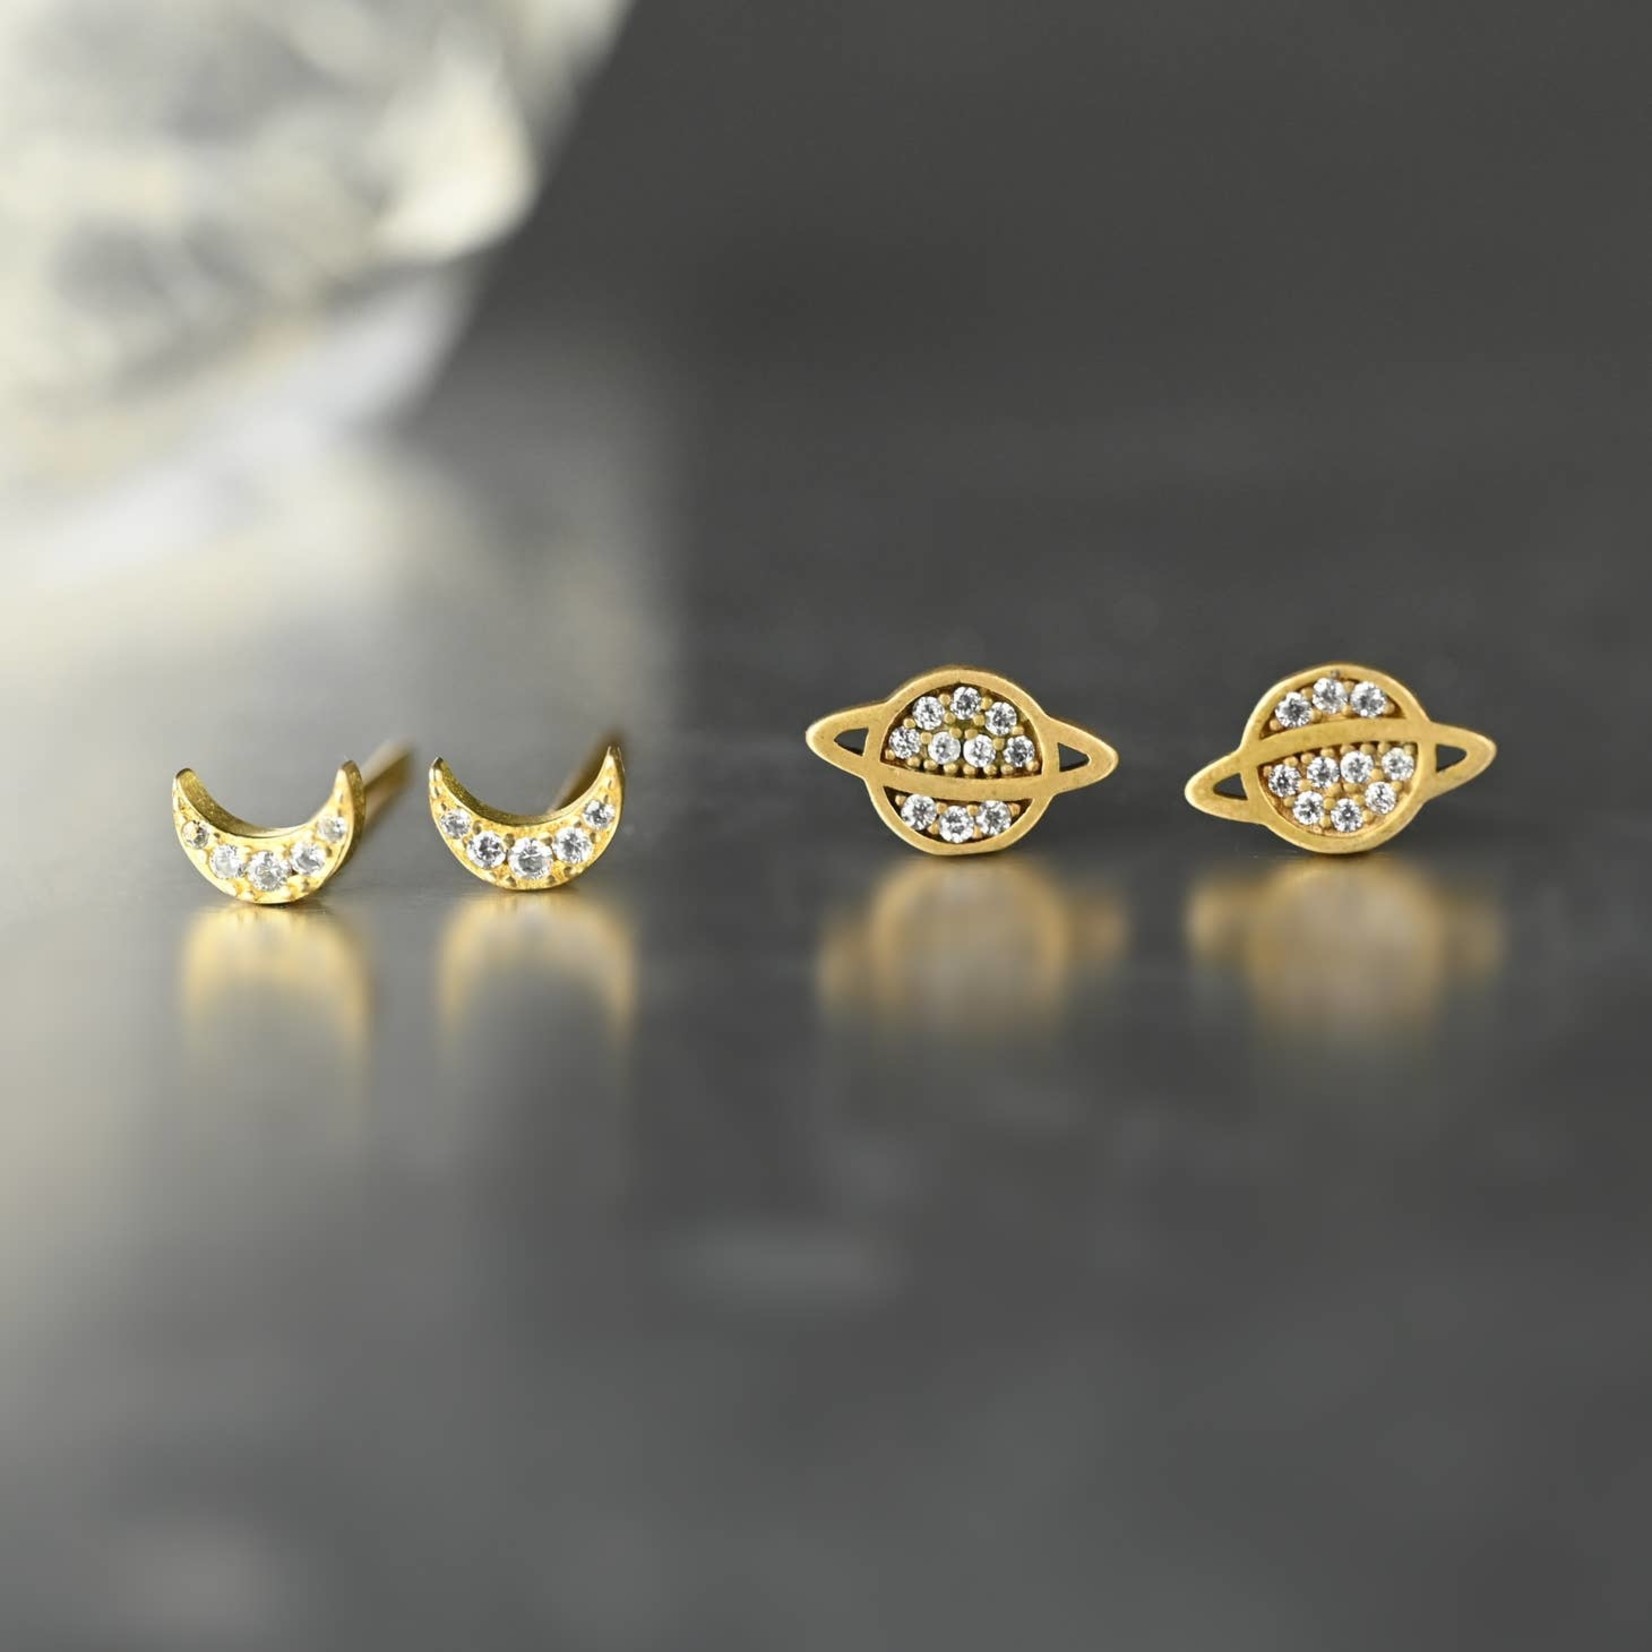 KBD Studio KBD Studio To The Moon & Back Stud Earrings with Pave Stones